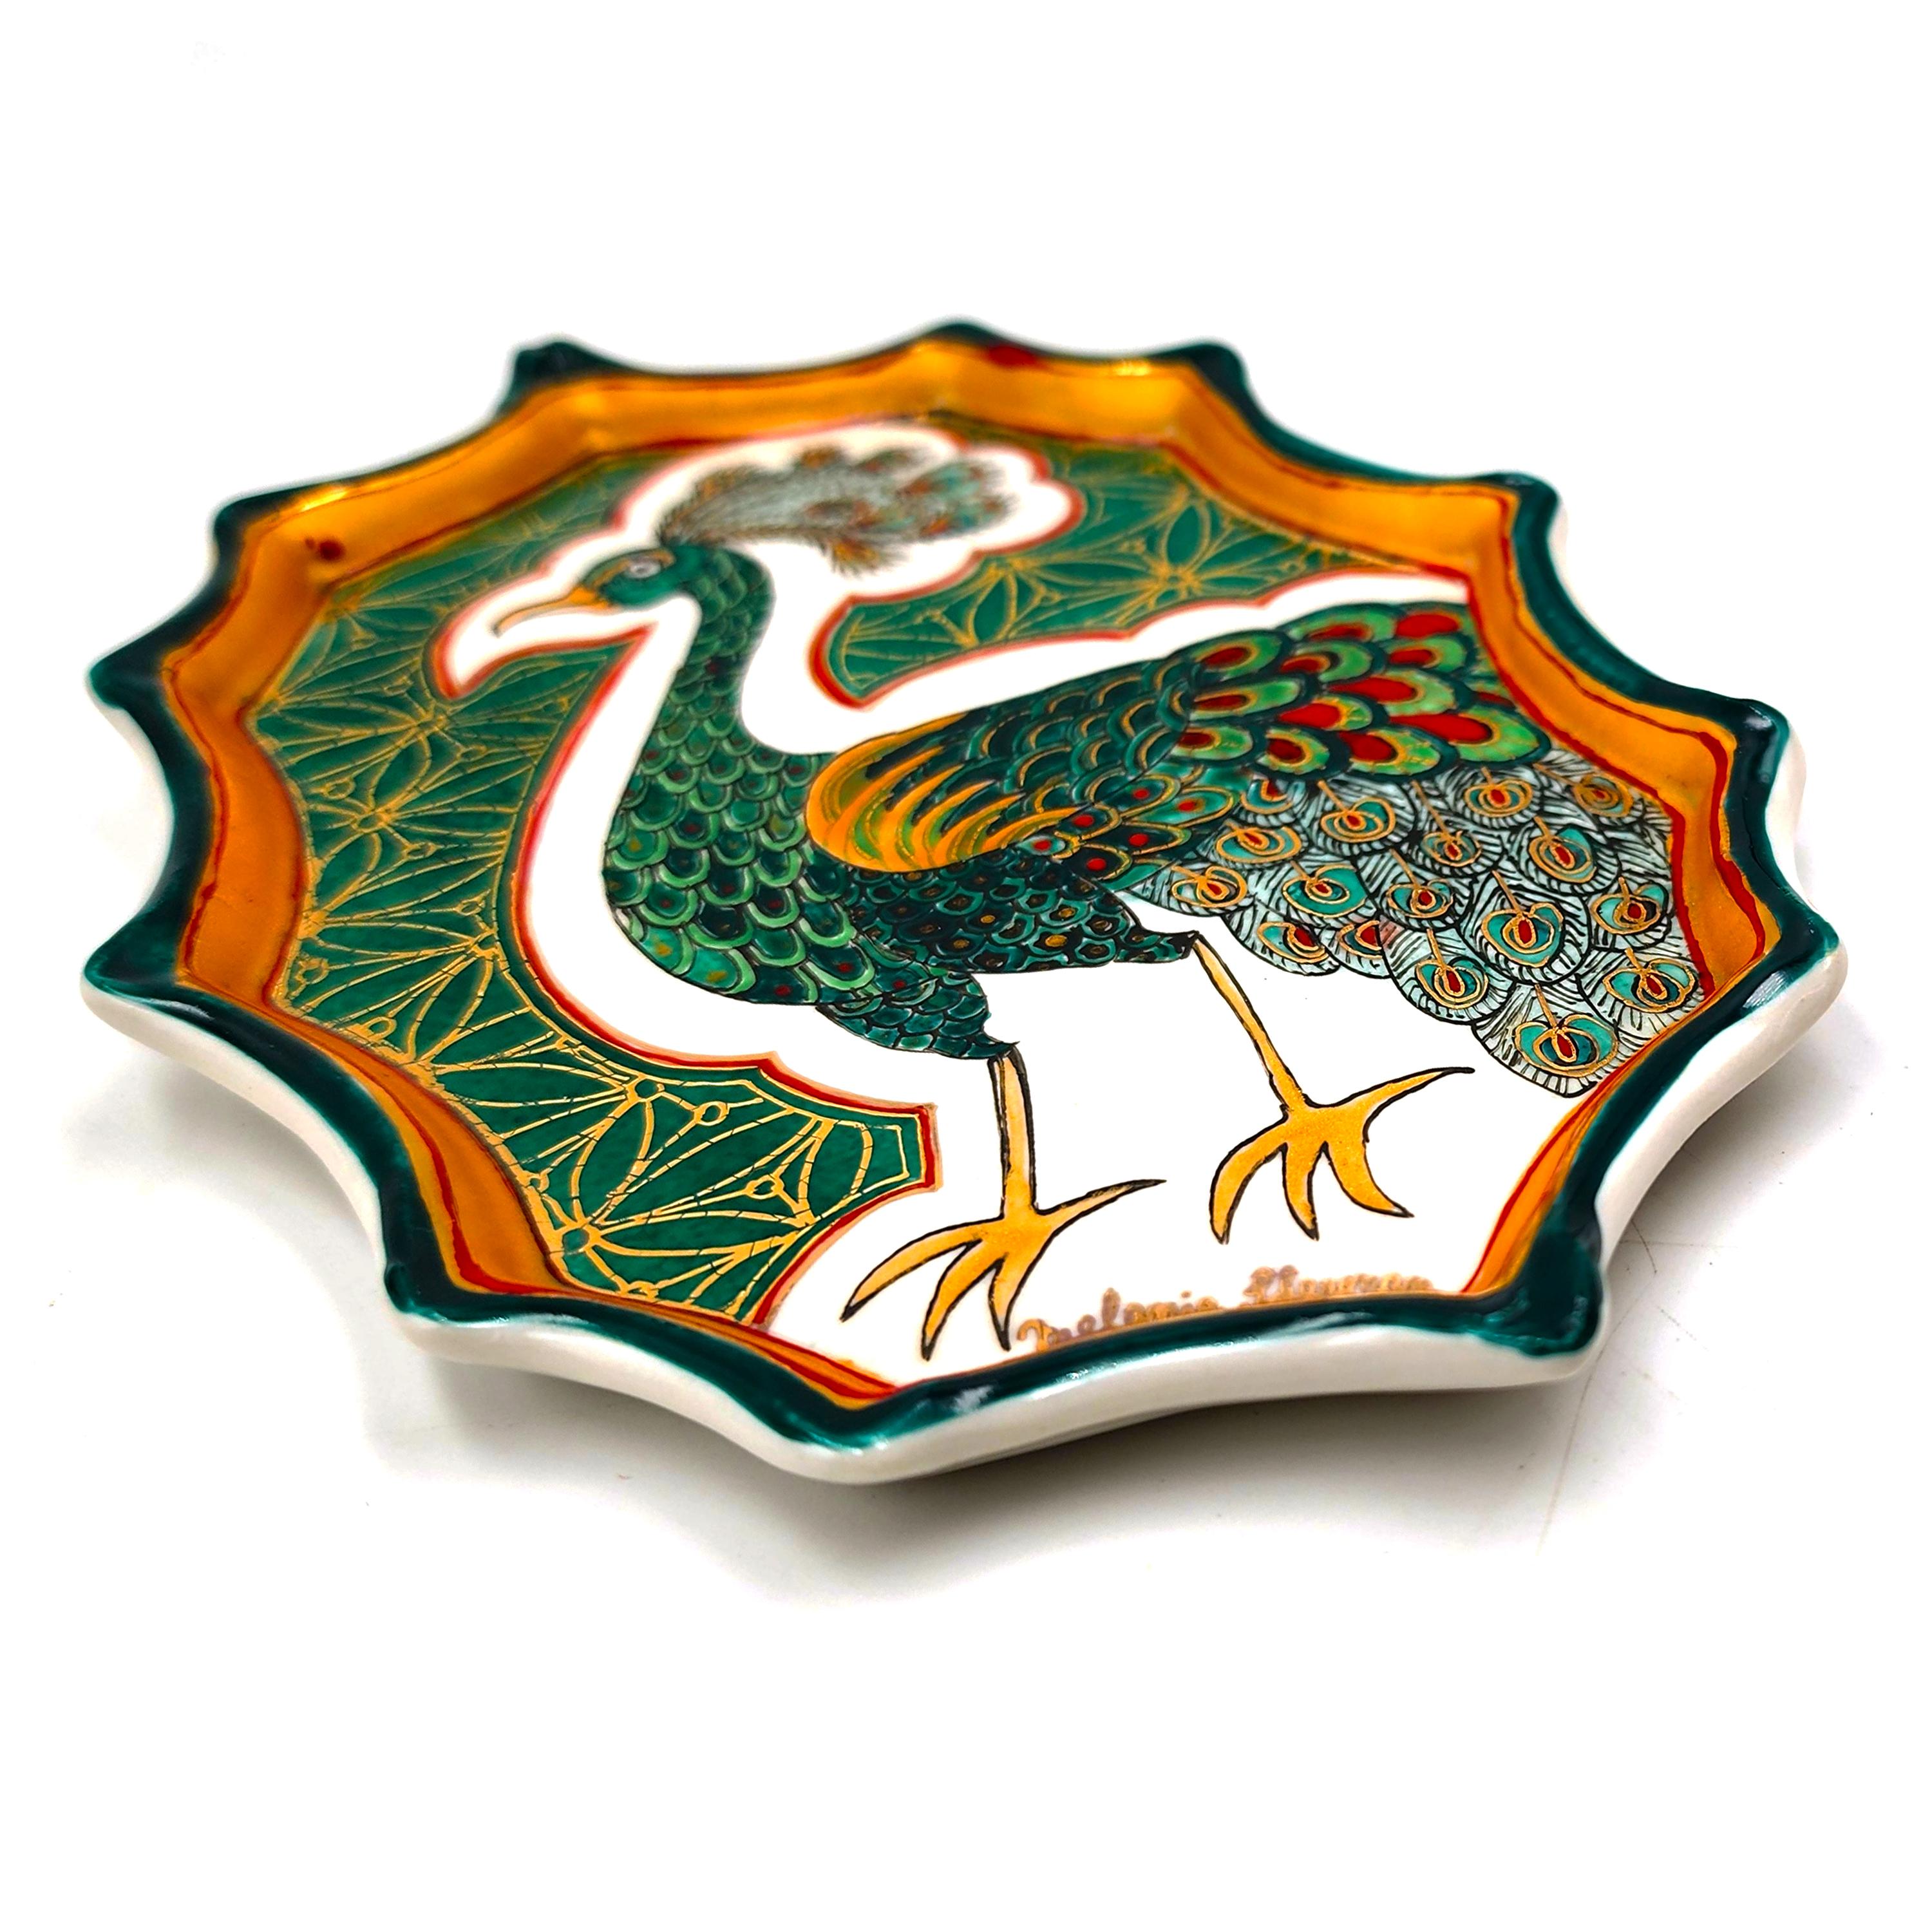 (MADE TO ORDER) (Hand-painted, hand-made, porcelain)
*Lead Time may vary between 1-3 weeks

Melanie Sherman
Vintage Peacock II (Wall Piece/Dish (handpainted)
Porcelain, Glaze, Overglaze, Chinapaints, 24k German Gold Luster, Brass Wire (for hanging,